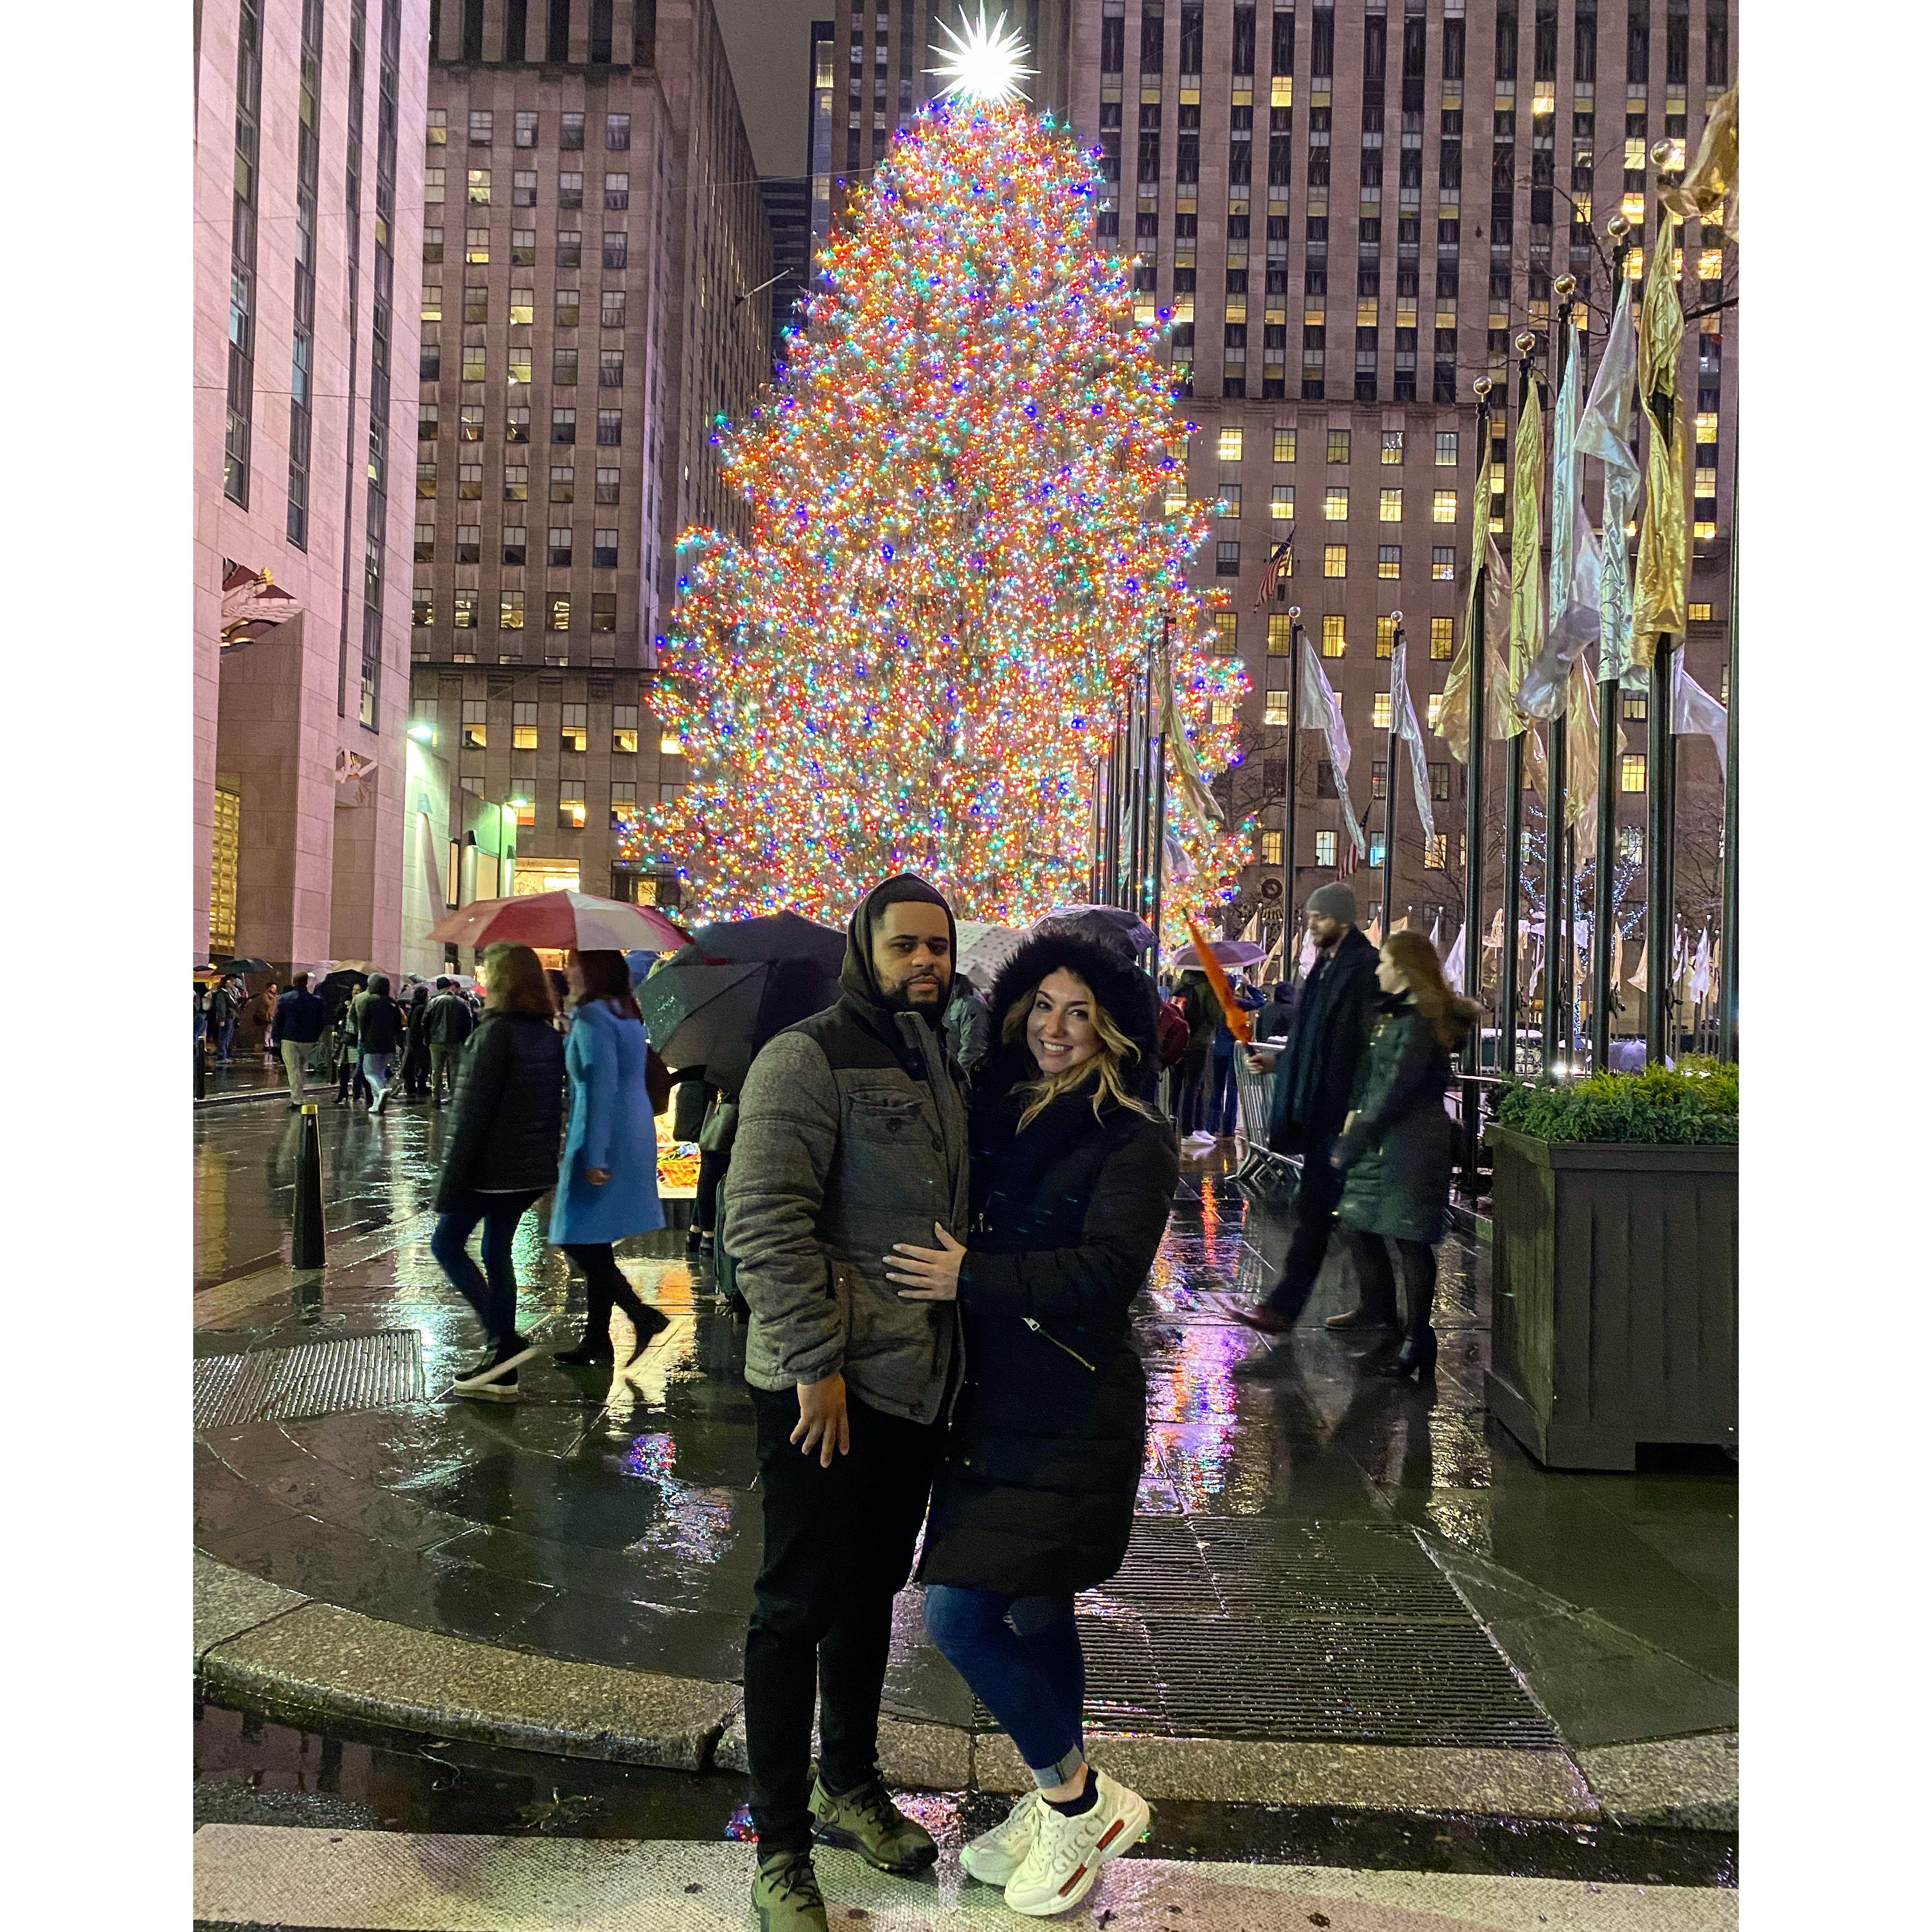 Mario took Serena to see the tree in Rockefeller Center